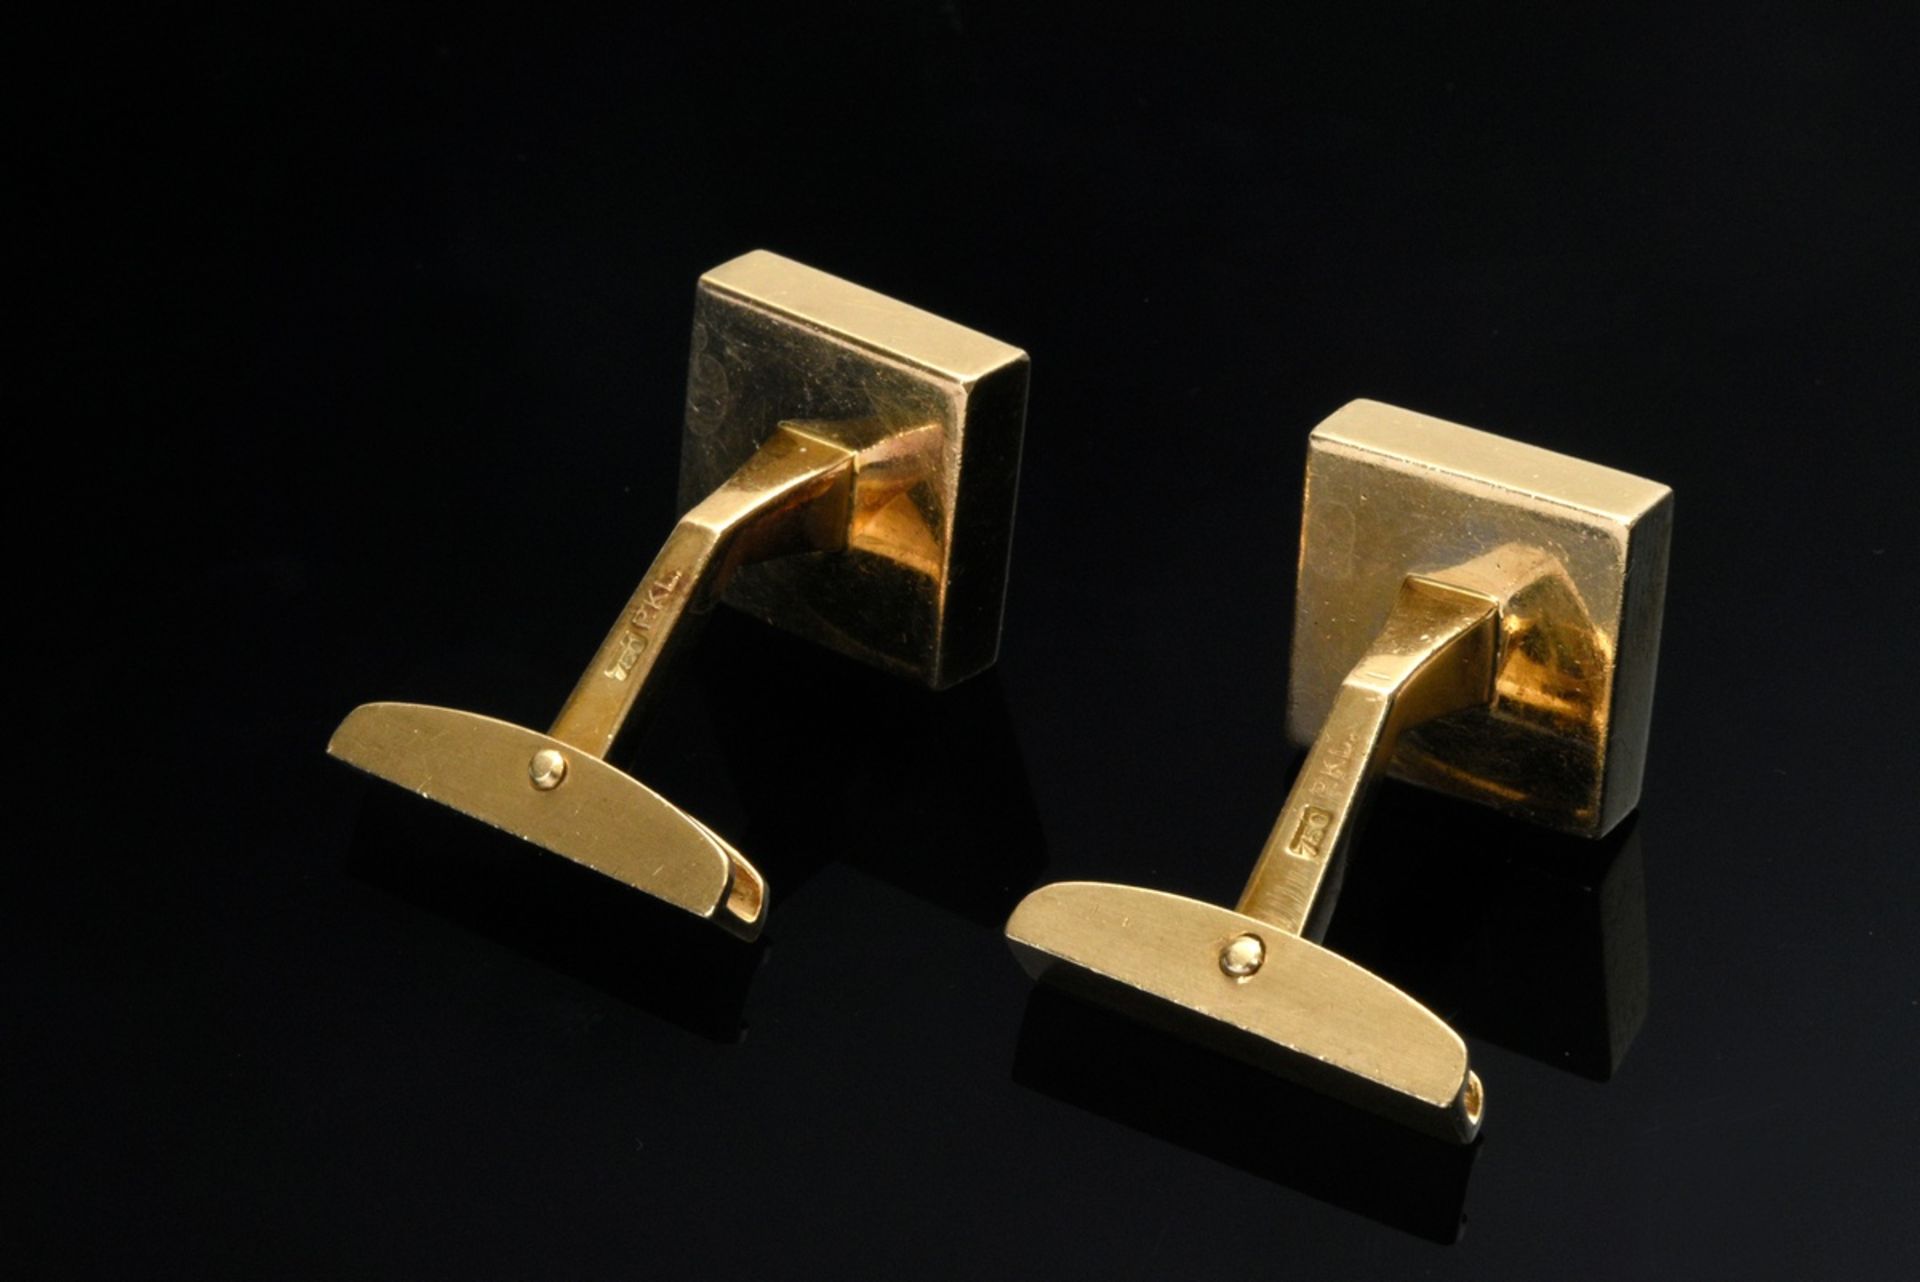 Pair of classic 750 yellow gold cufflinks with lapis lazuli carreés, 22.2g, 1.3x1.3cm - Image 2 of 2